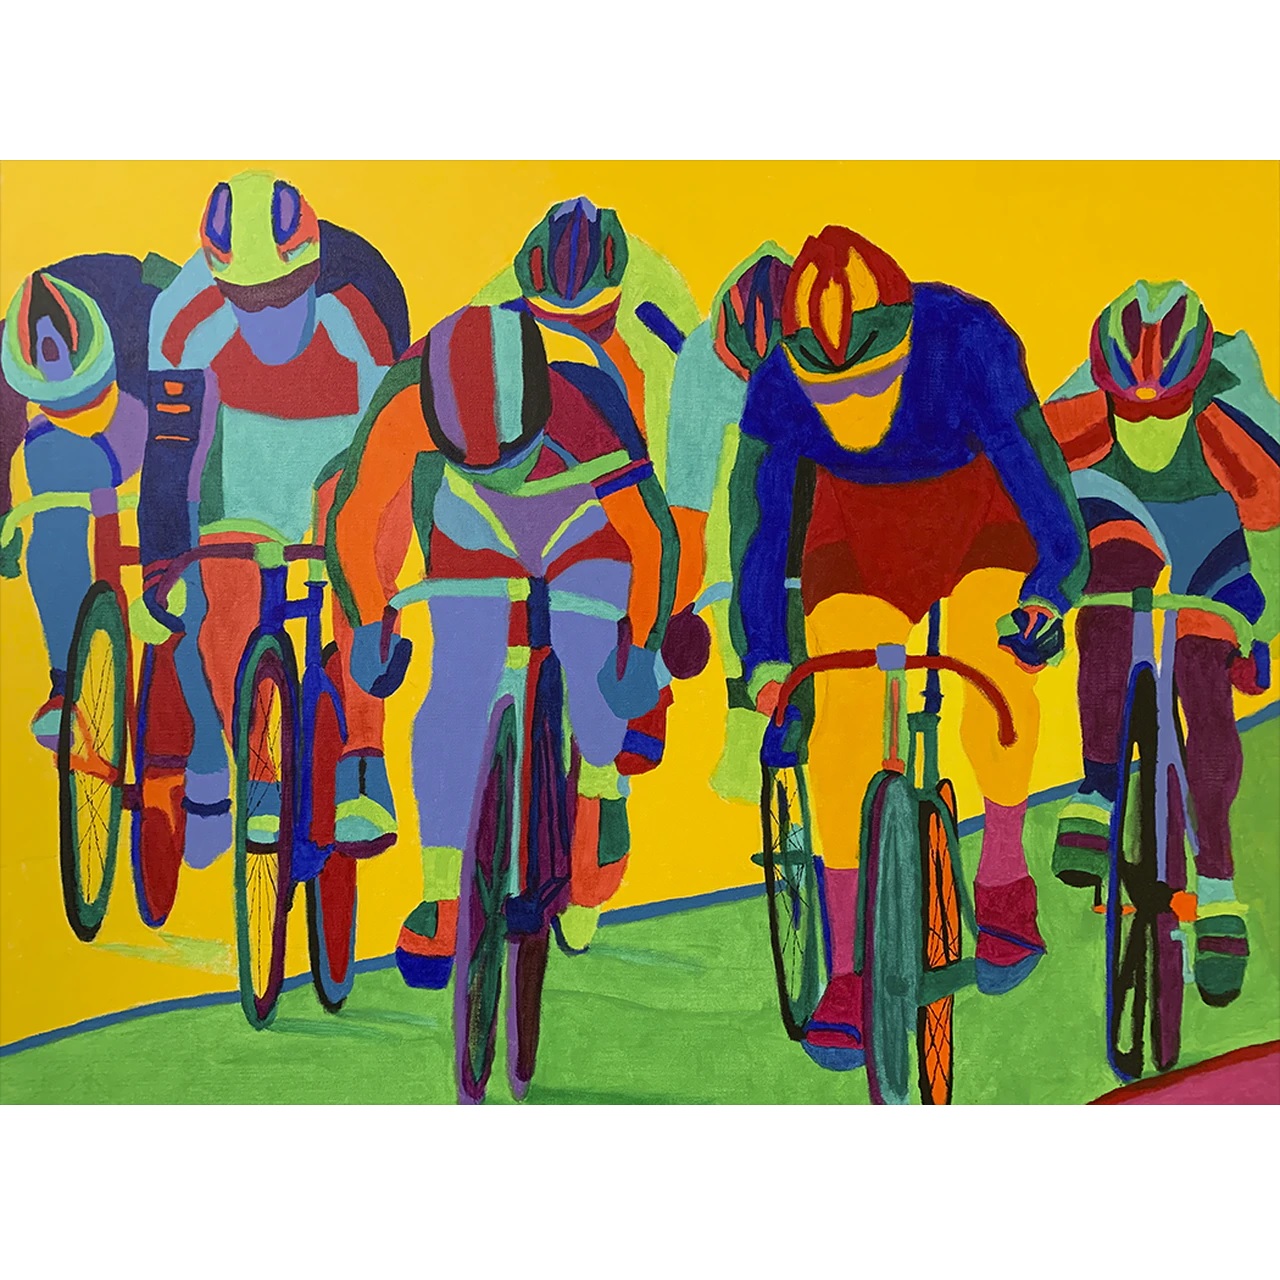 Out of Turn 4 Velodrome Bike Racing Bicycling Art Poster